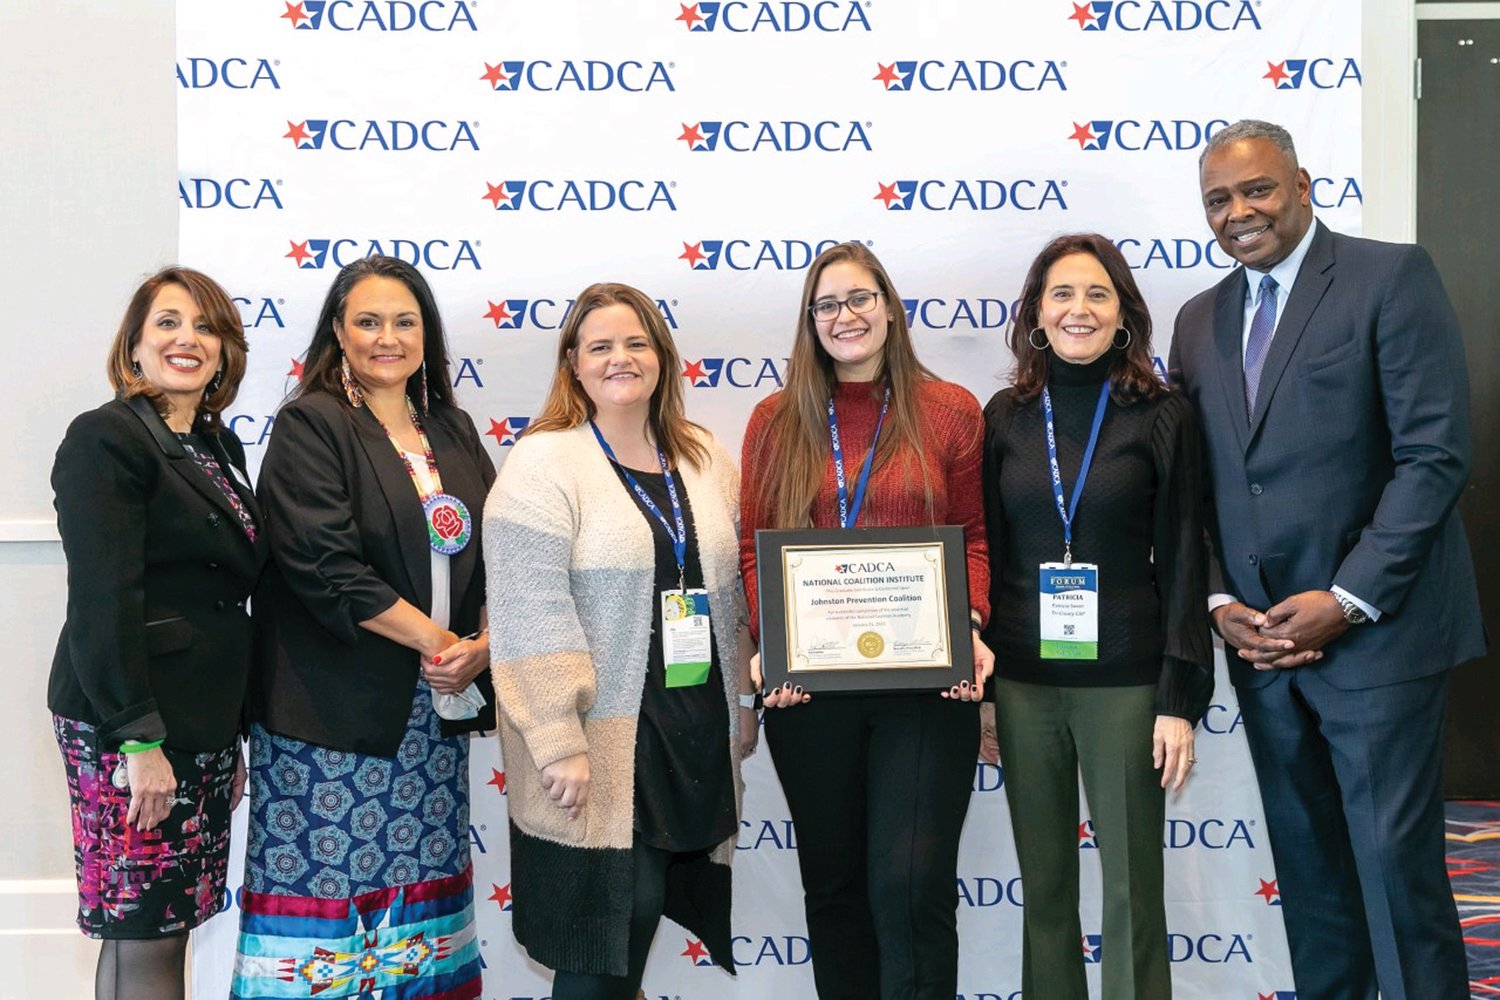 NATIONAL AWARD: From left to right, Pat Castillo – National Coalition Institute Director, Jeannie Hovland – CADCA Board Member, Andrea Paiva, Kaitlyn Maggiore, Patricia Sweet – Johnston Prevention Coalition and General Barrye Price – CADCA President & CEO.